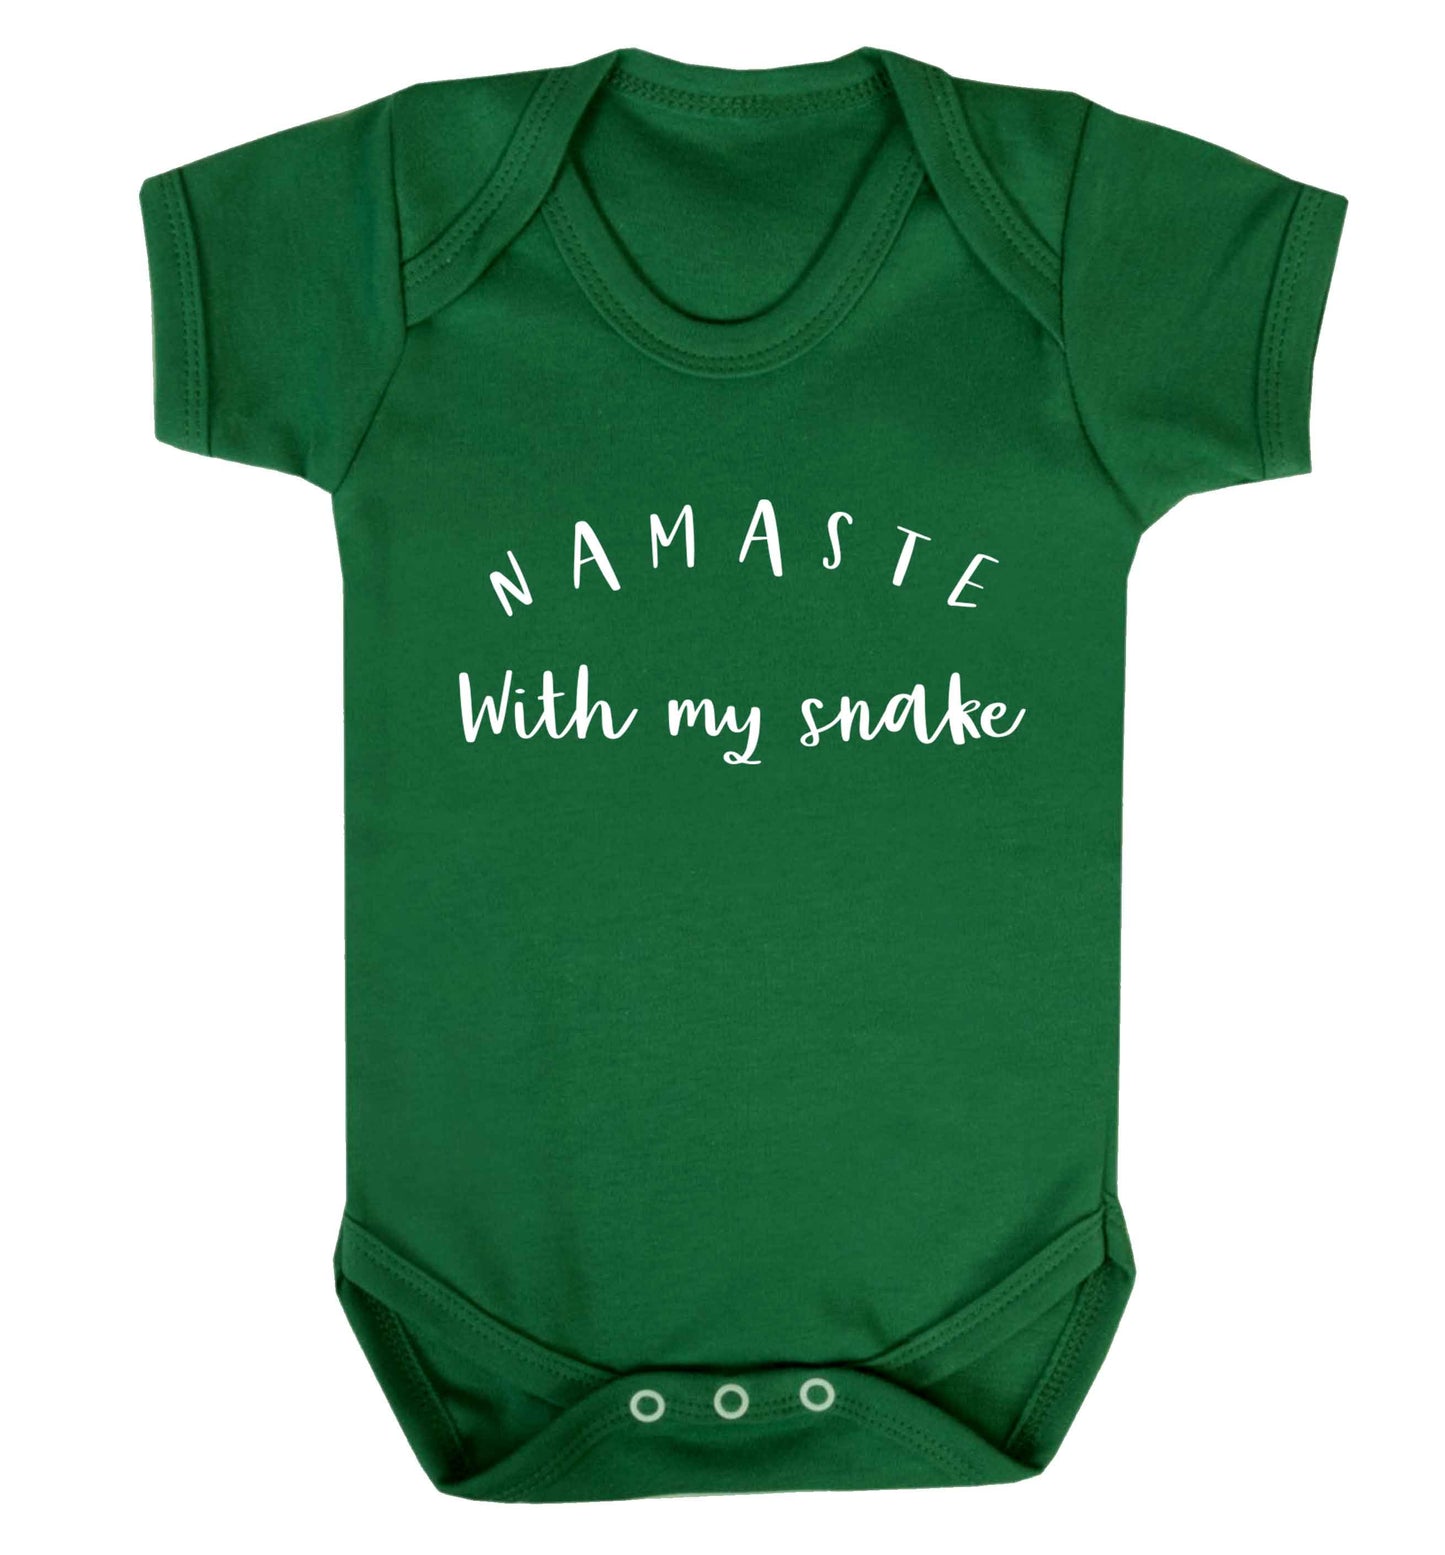 Namaste with my snake Baby Vest green 18-24 months